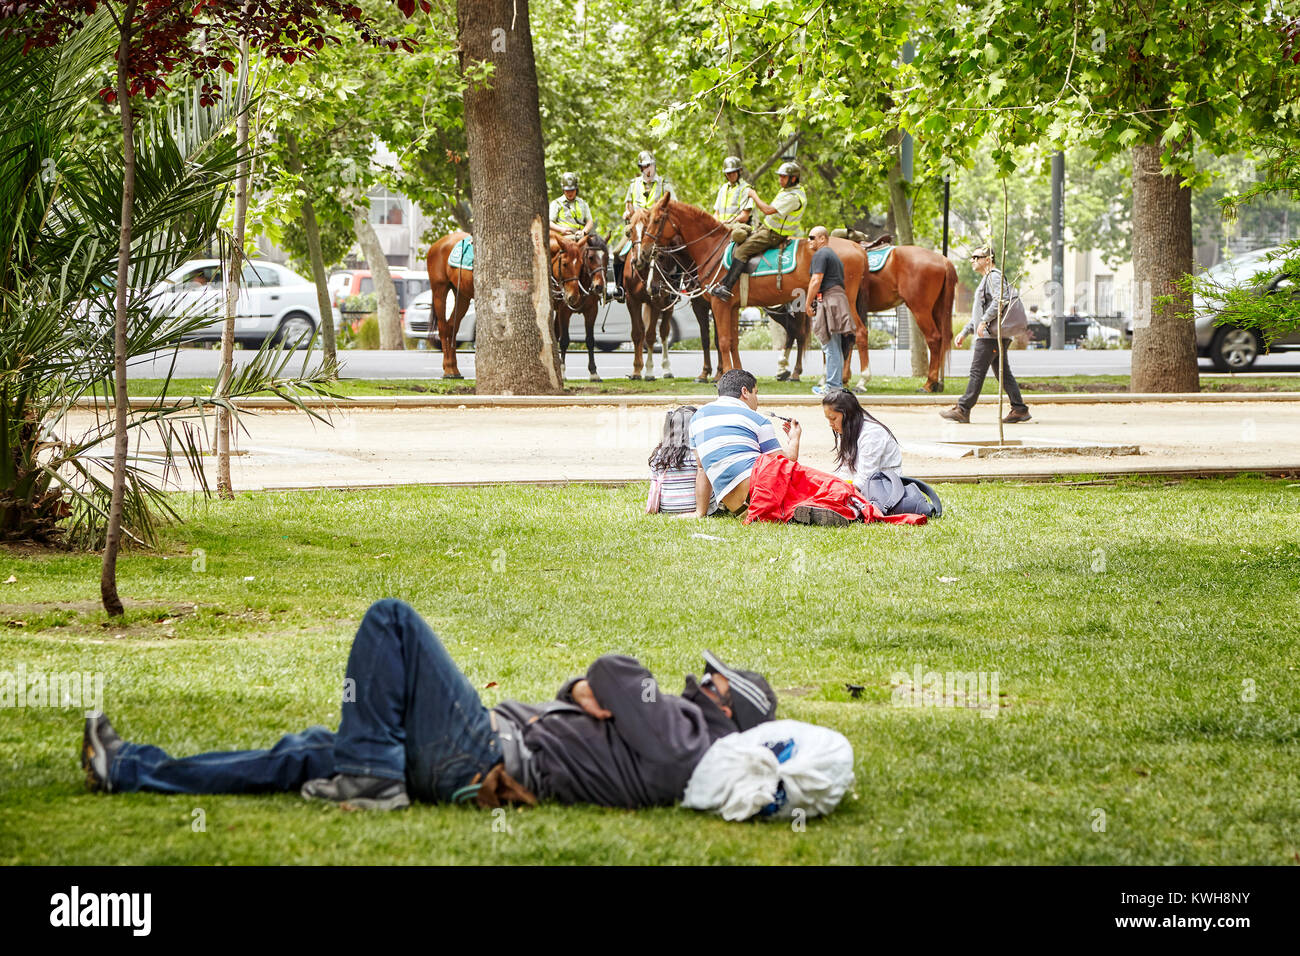 Santiago de Chile, Chile - October 24, 2013: People rest in a municipal park with mounted police in a distance (Carabineros de Chile). Stock Photo